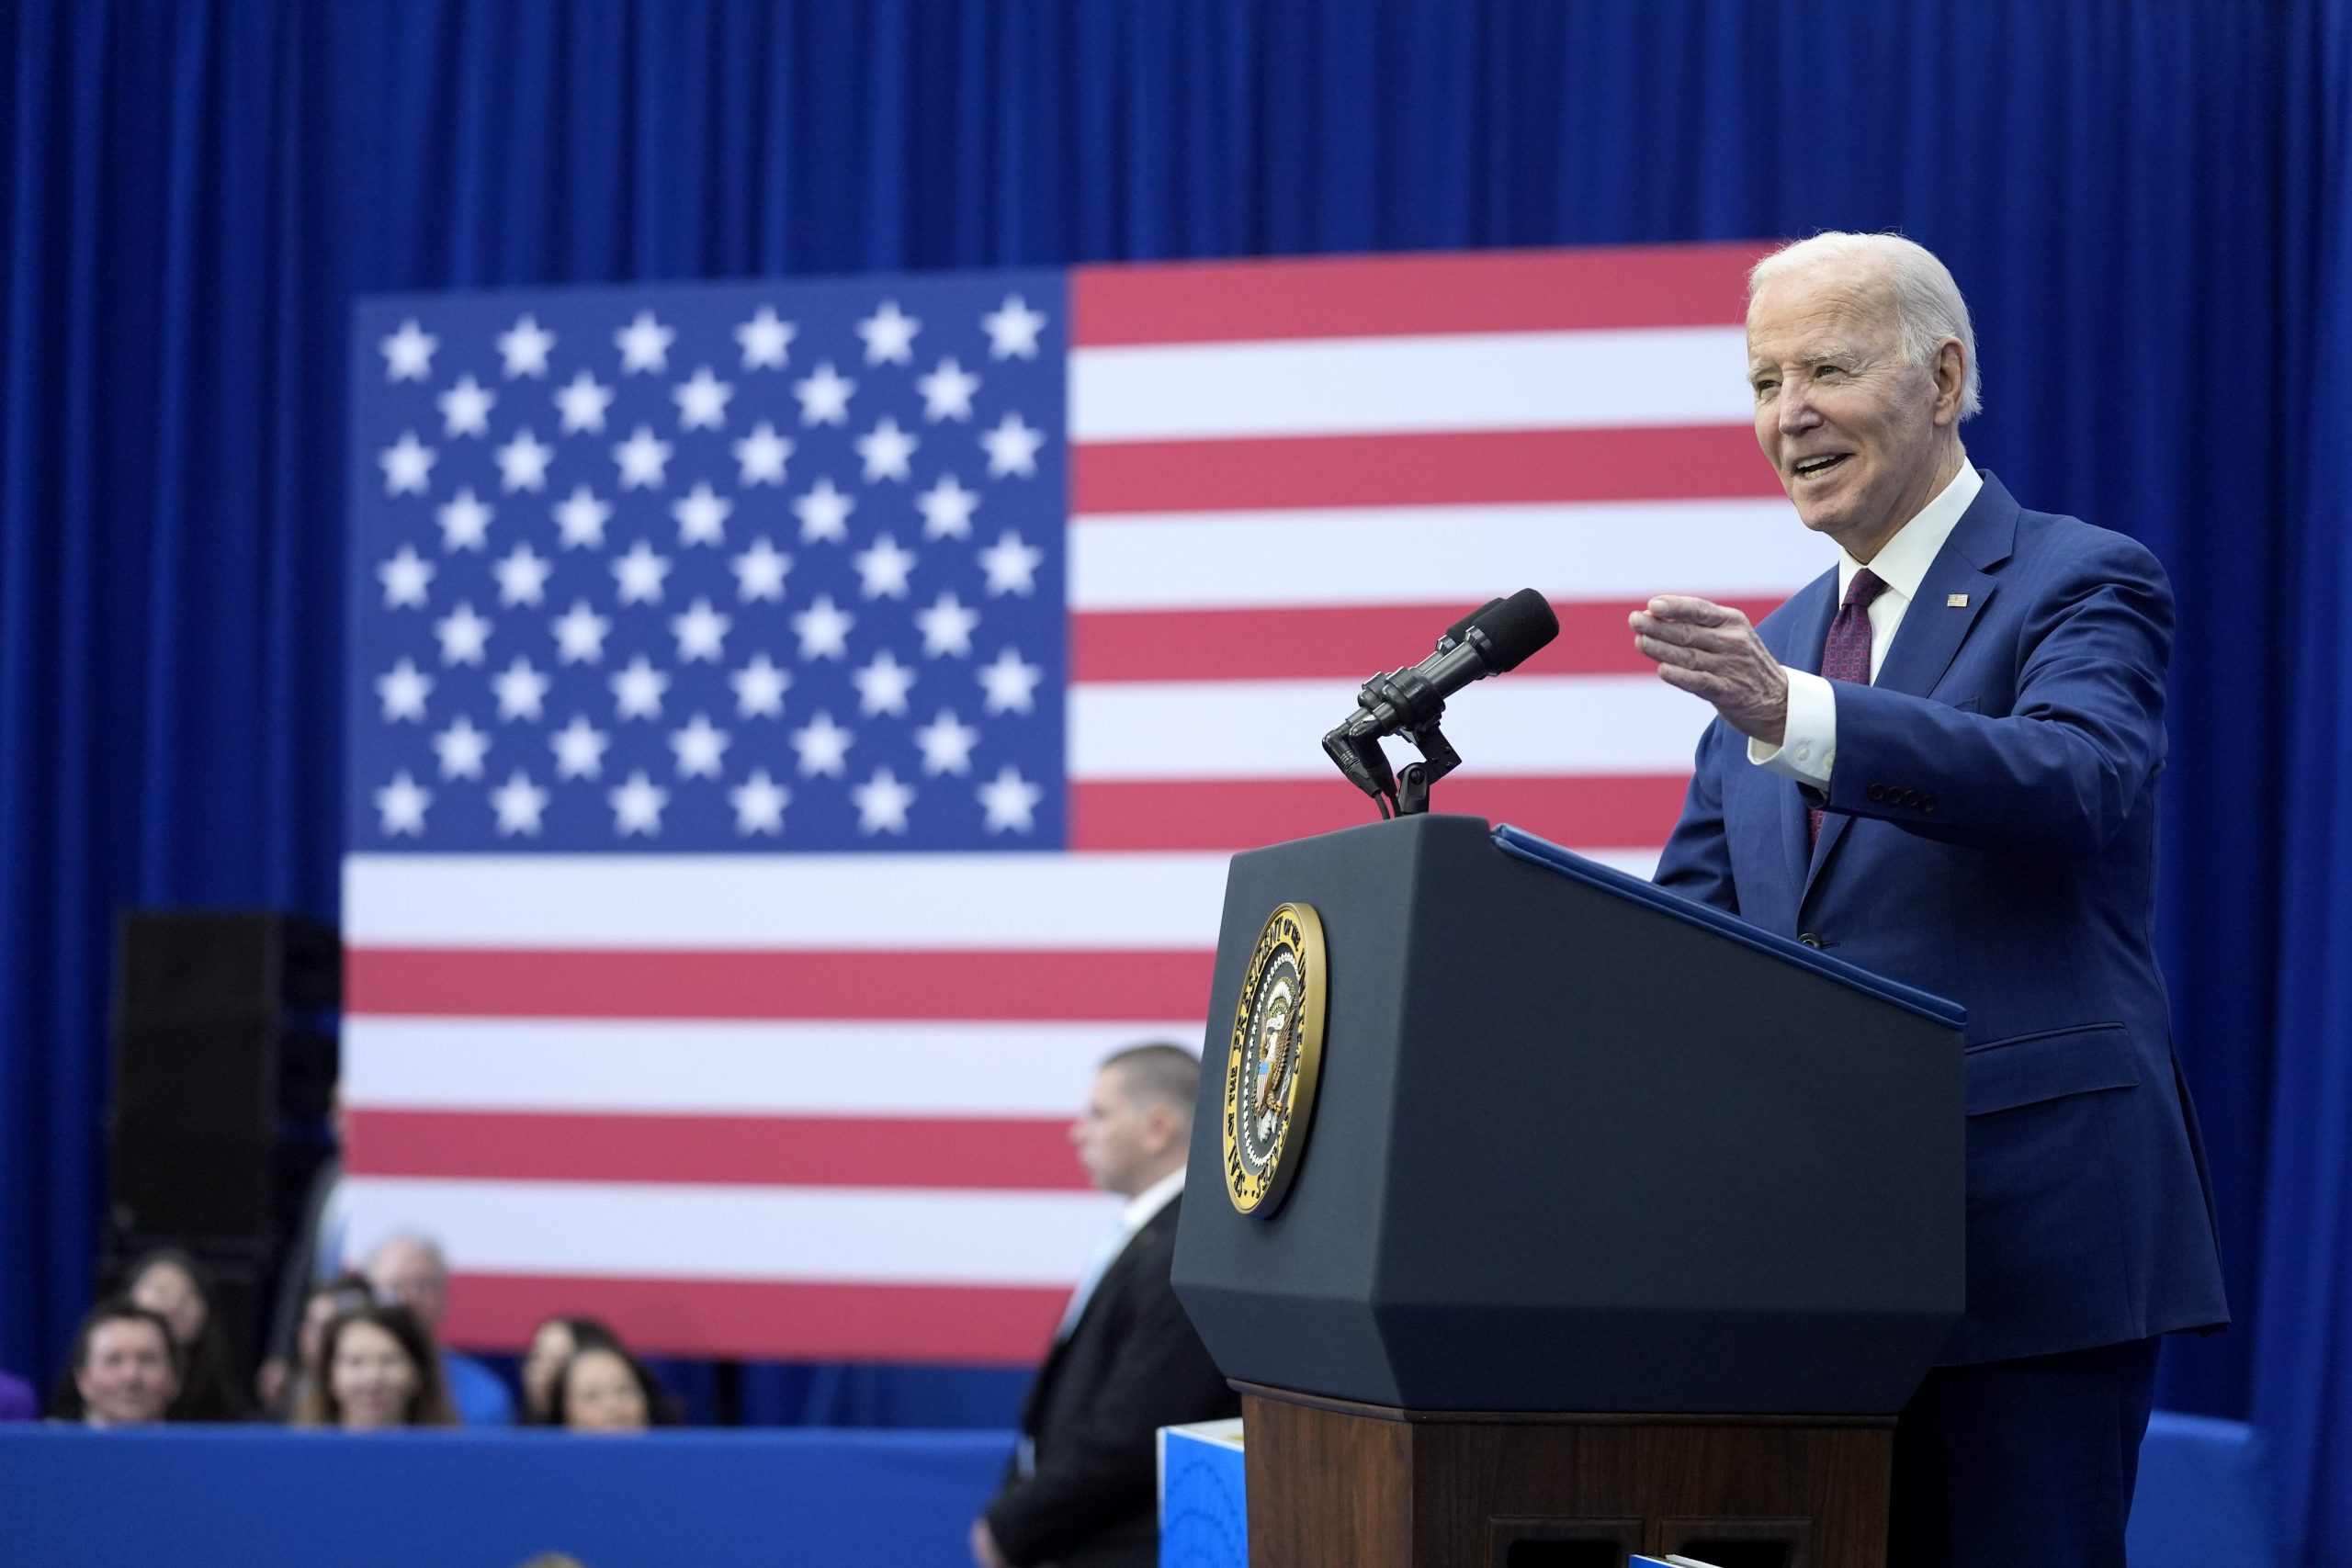 Biden heads to the Michigan county emerging as the swing state’s top bellwether